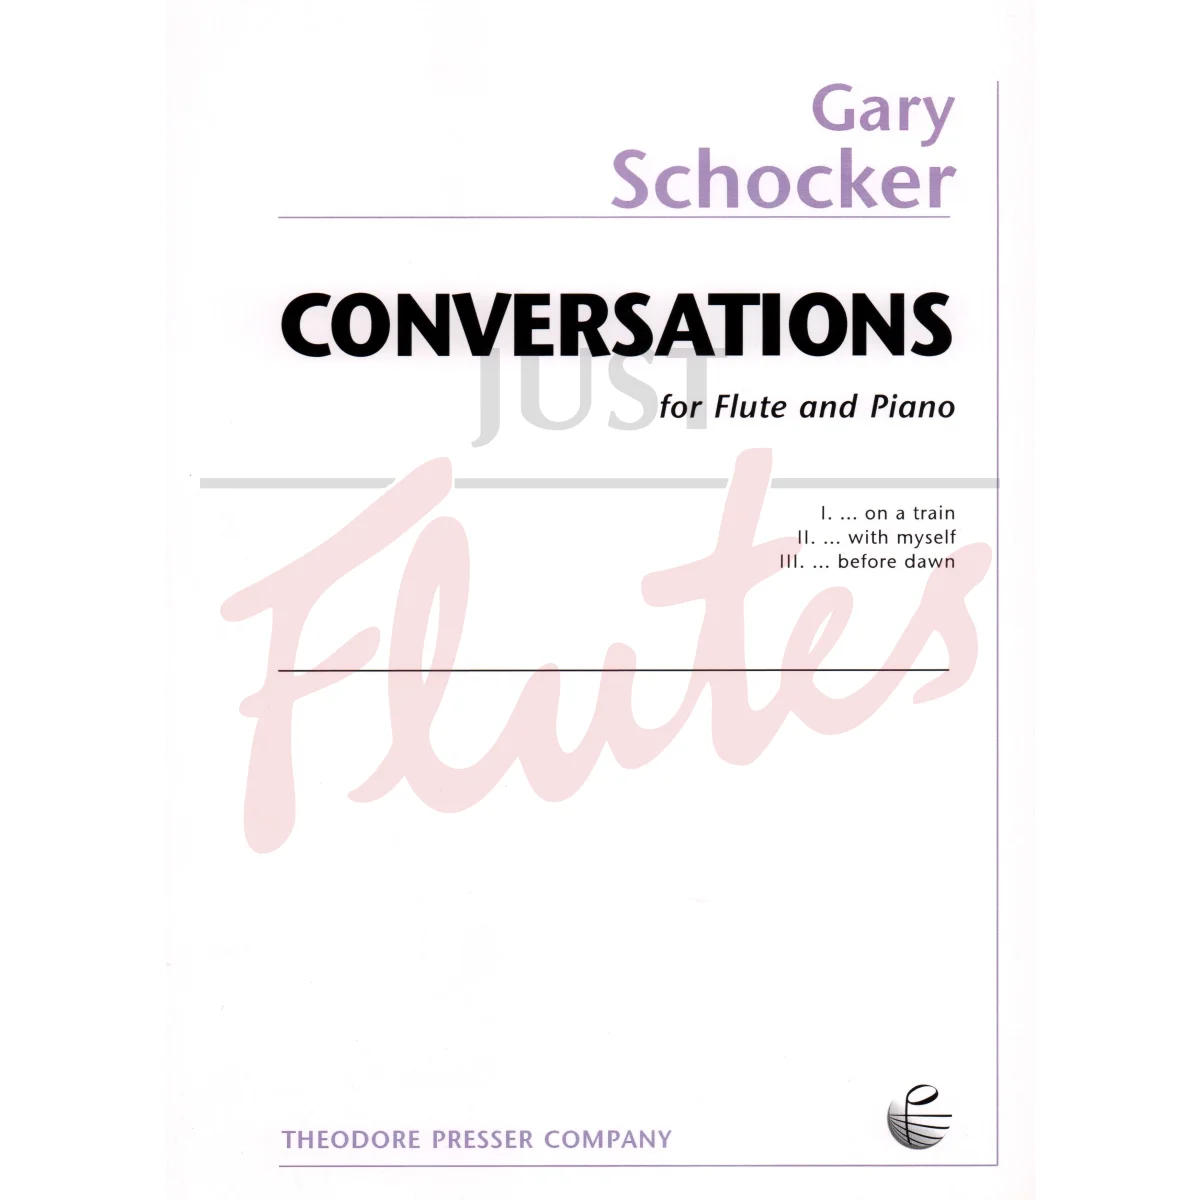 Conversations for Flute and Piano